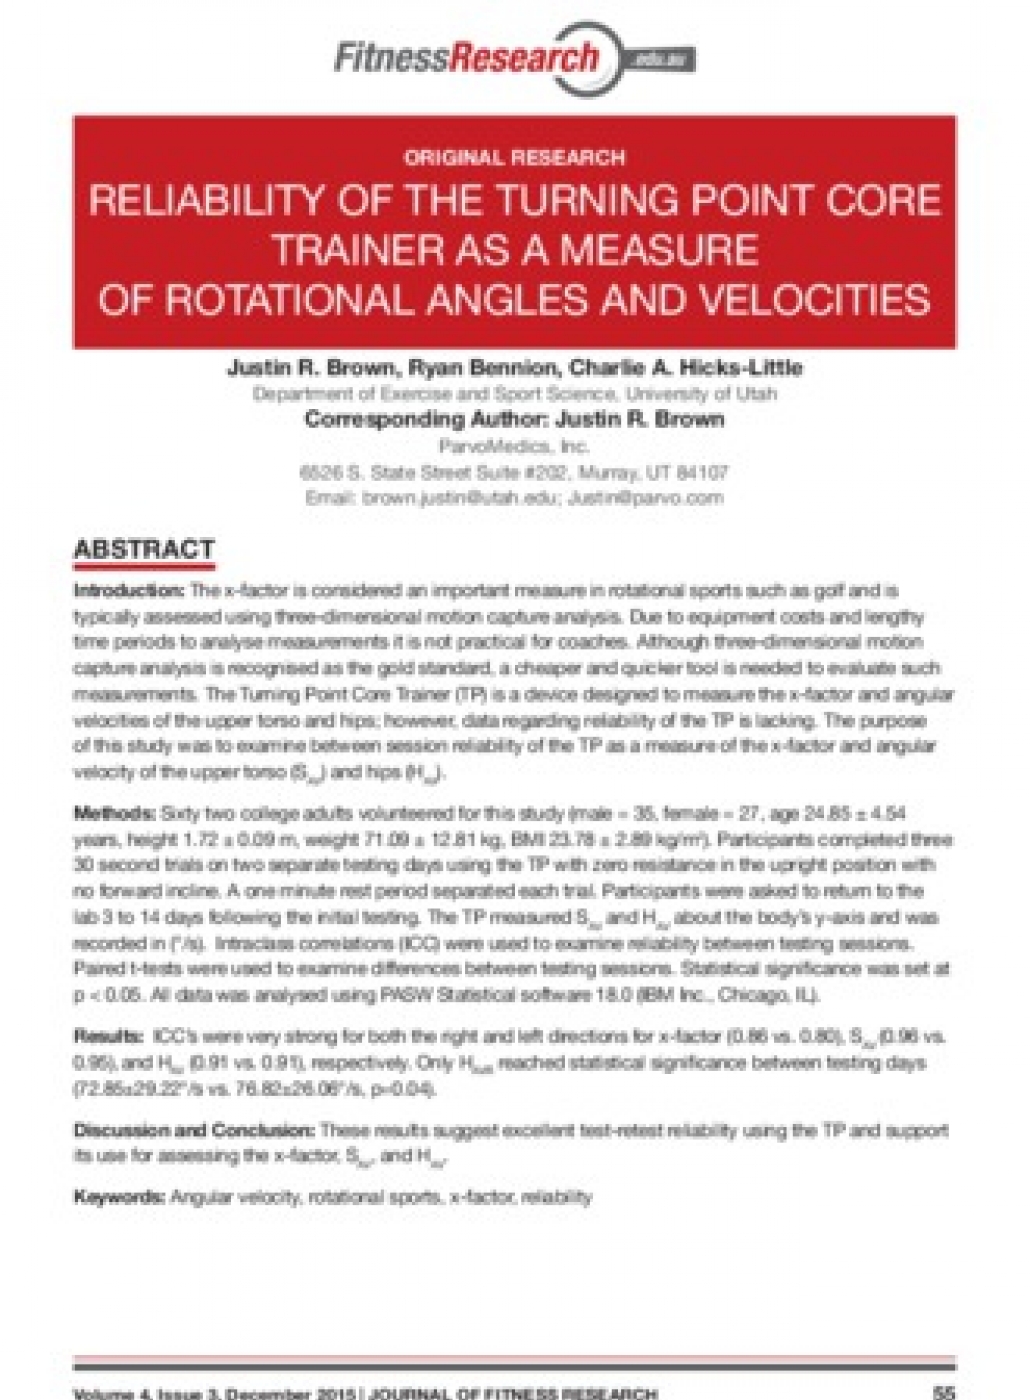 RELIABILITY OF THE TURNING POINT CORE TRAINER AS A MEASURE OF ROTATIONAL ANGLES AND VELOCITIES